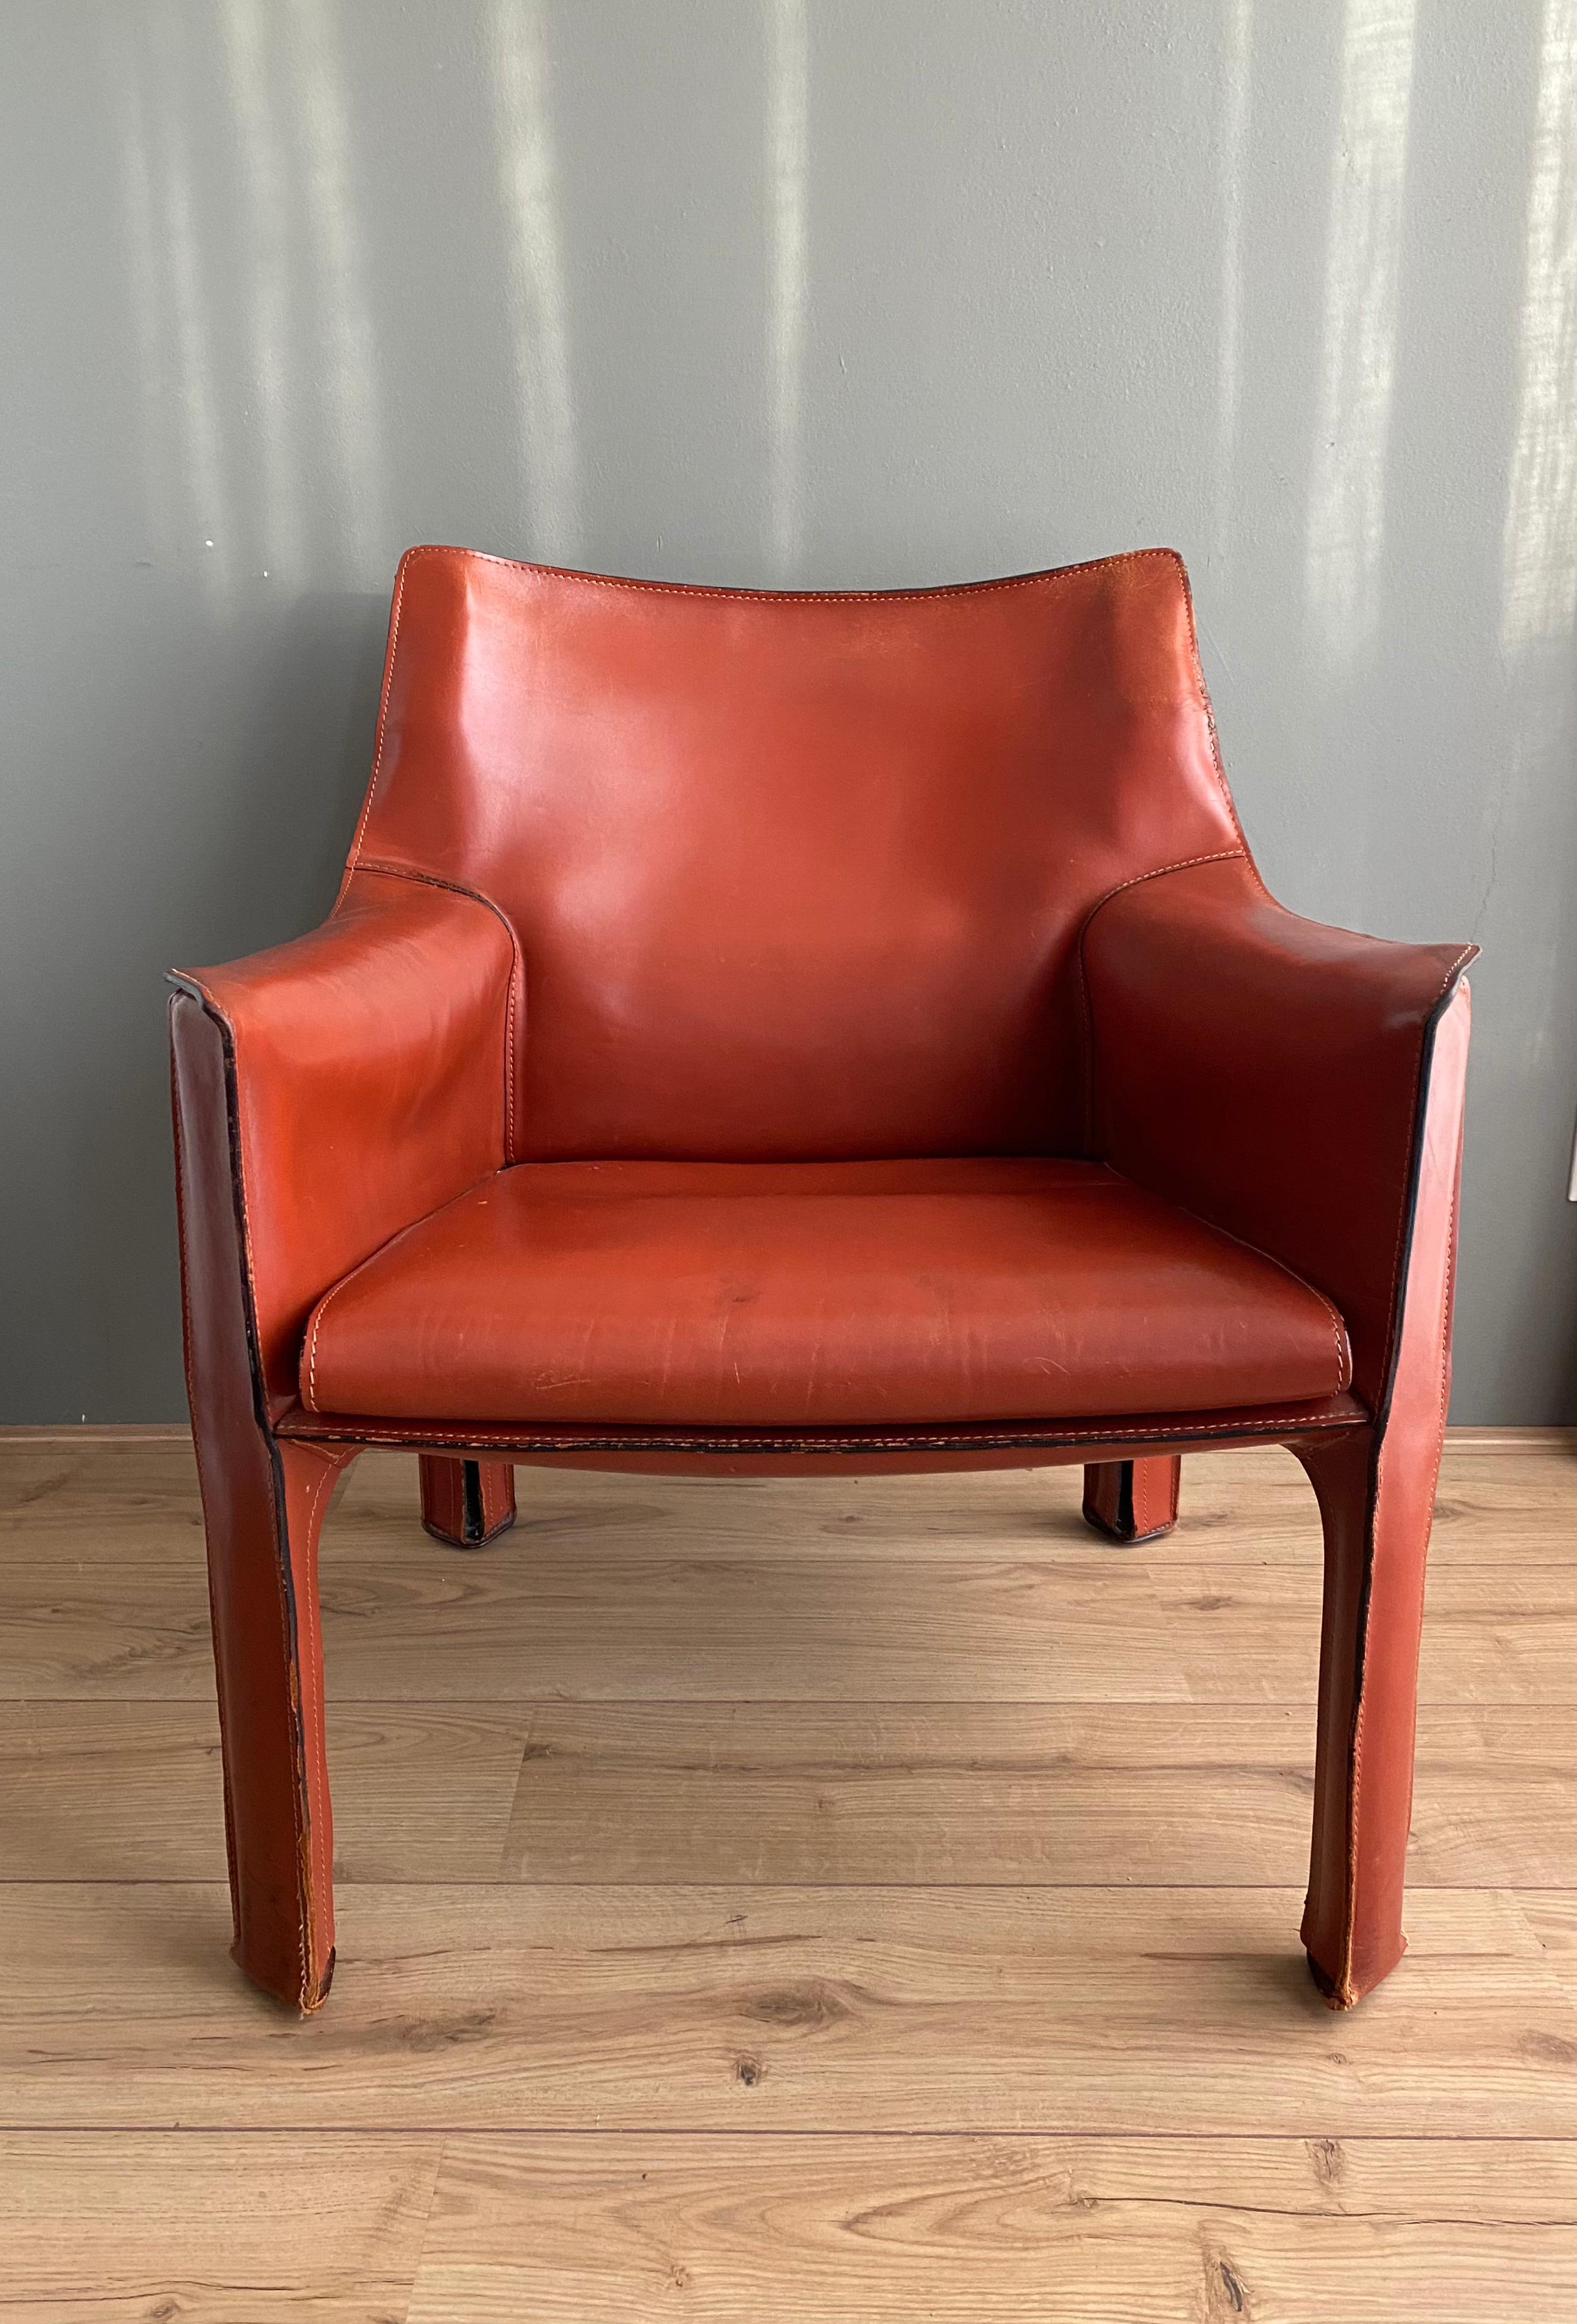 Cognac or terracotta Italian leather lounge chair designed by Mario Bellini, circa 1970s. The thick leather upholstery covers a metal base. Each leg features a zipper. To the upper side of the chair a former repair is still to be seen. However the